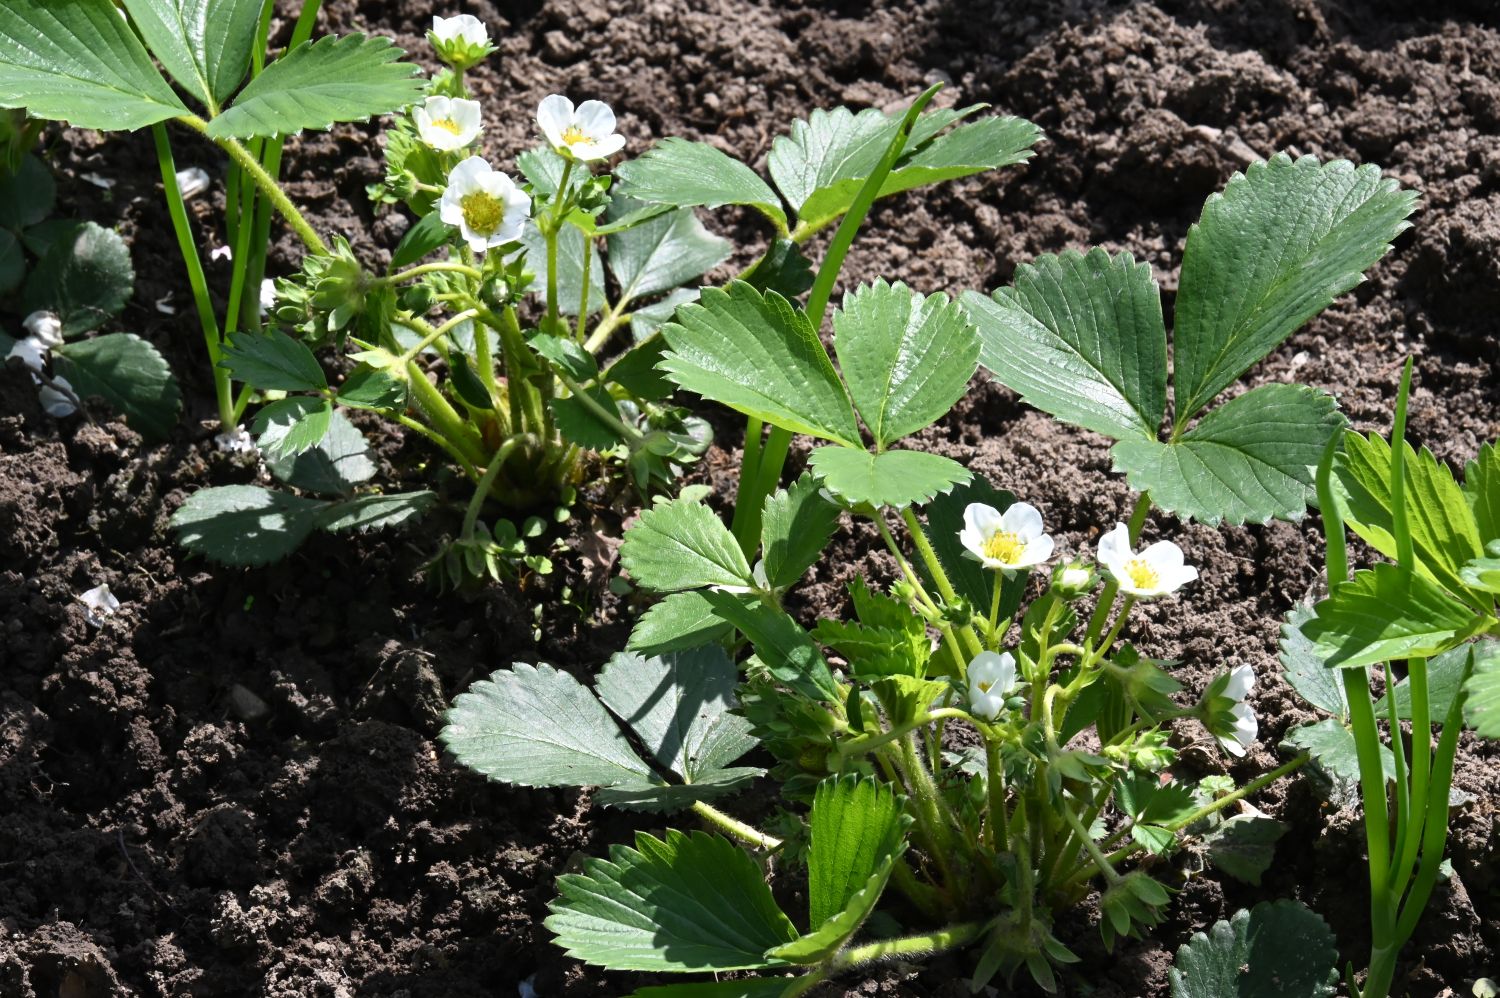 White flowers of the strawberry plant